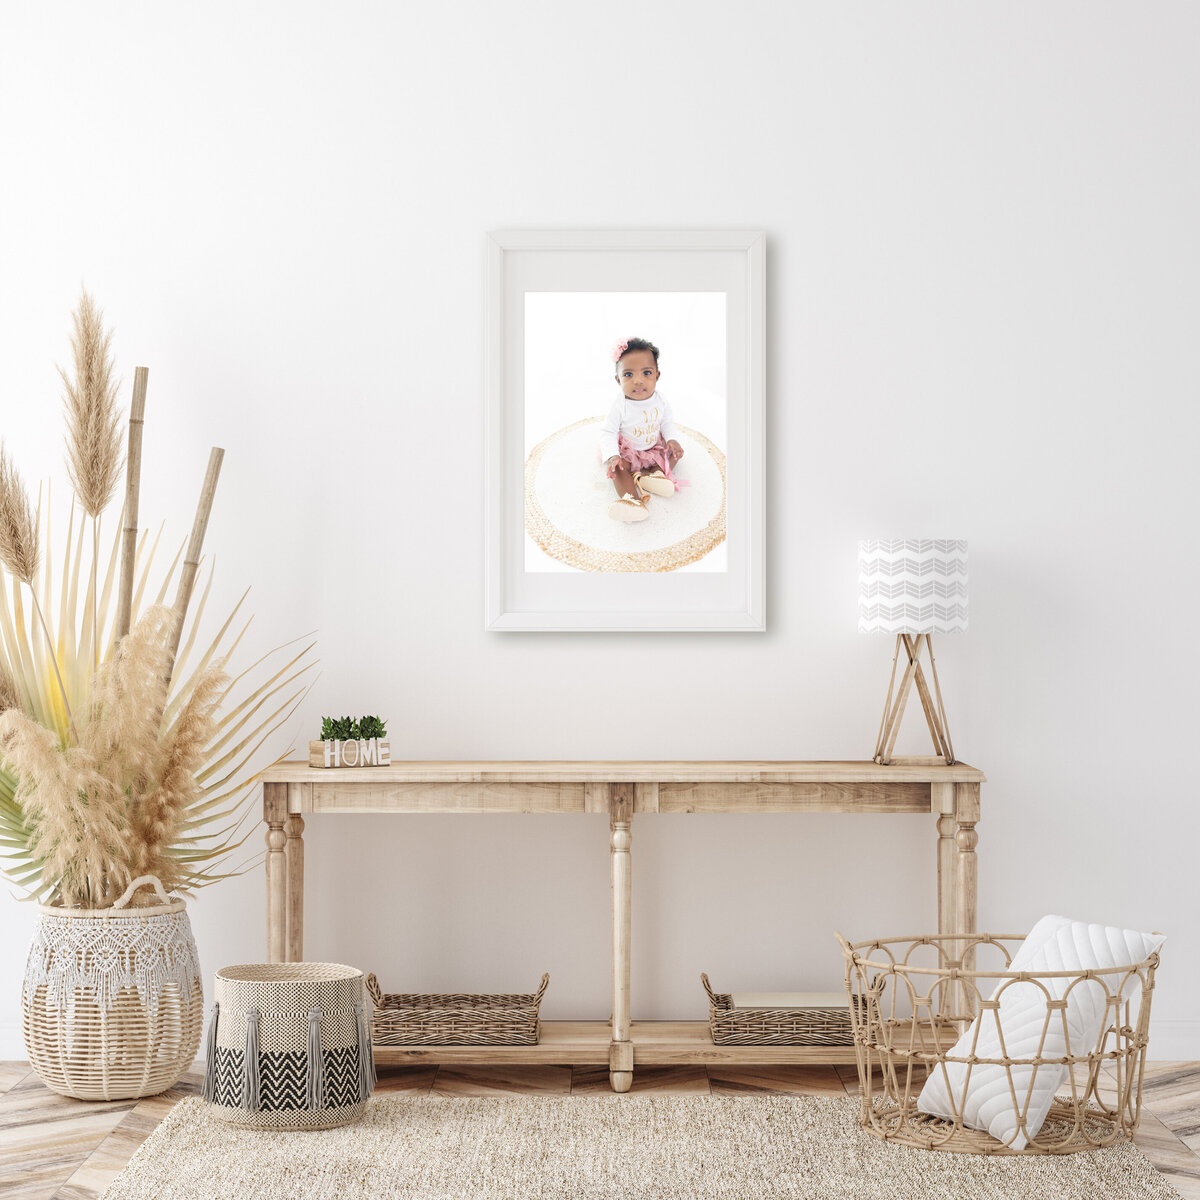 A toddler photo hangs in a fine art frame in a living room